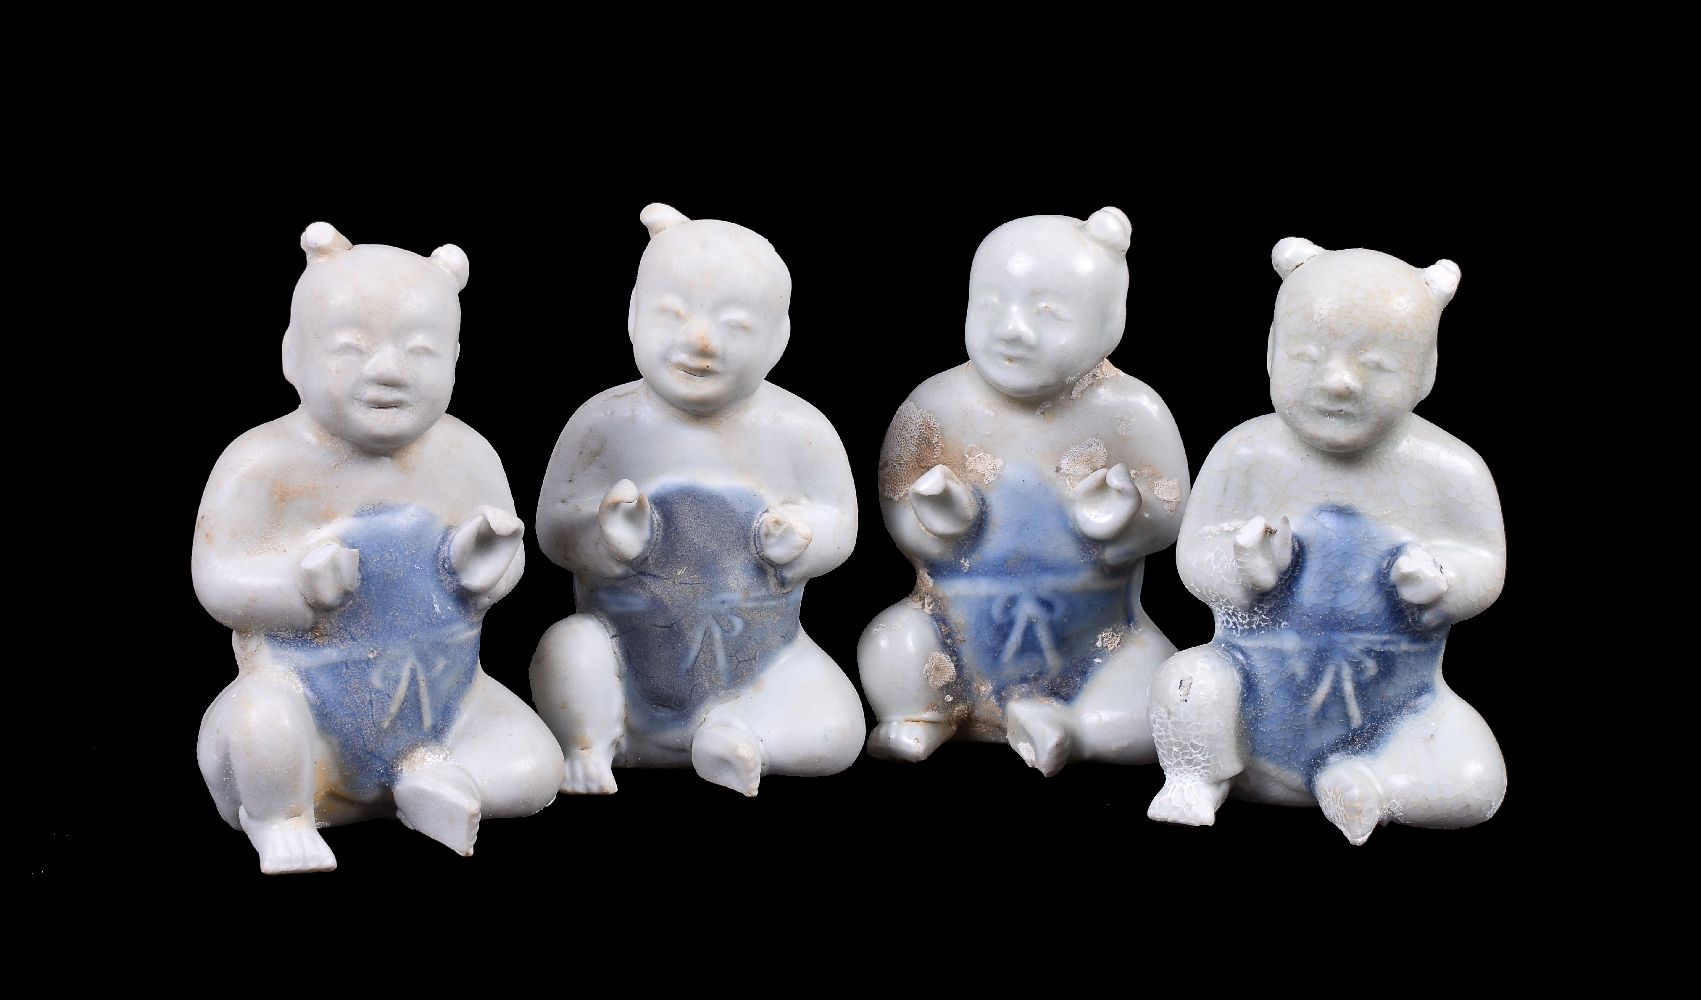 Four Chinese Ca Mau Shipwreck Figures of seated boys